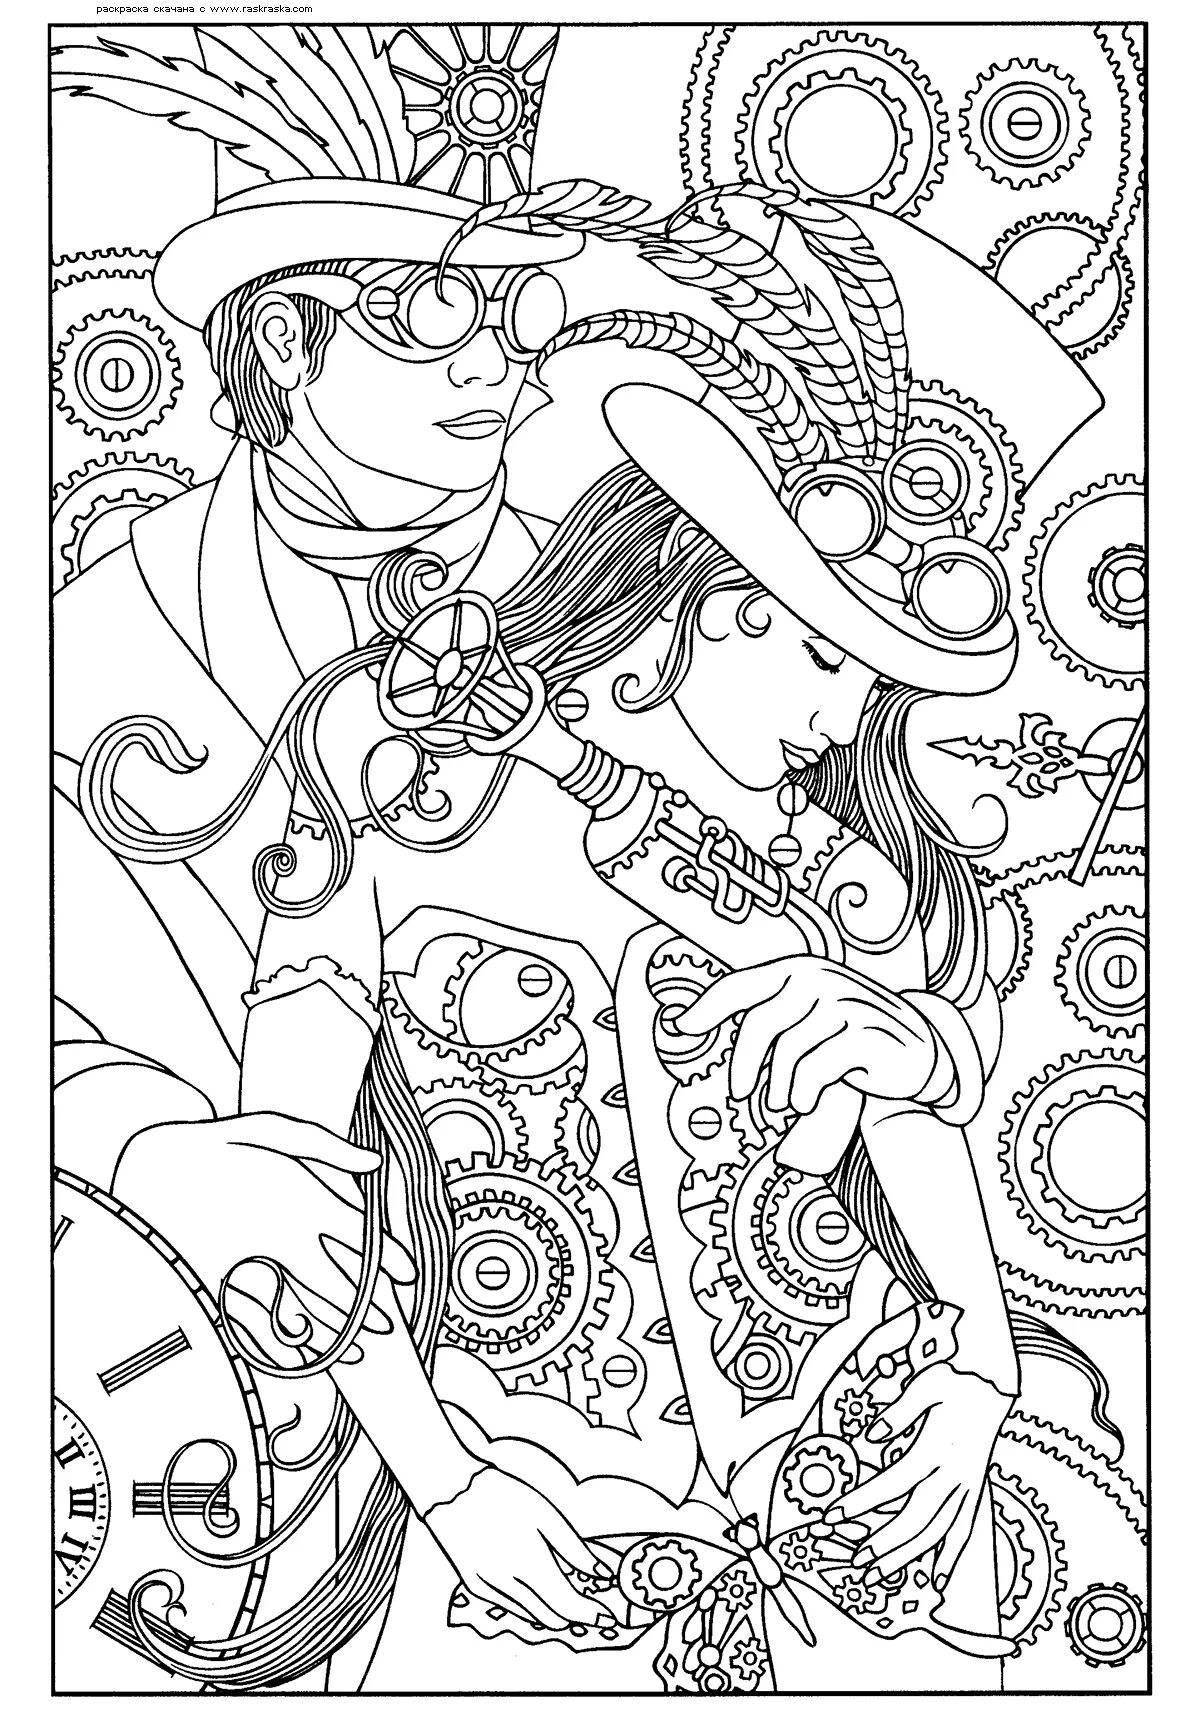 Harmonious coloring pages for adults